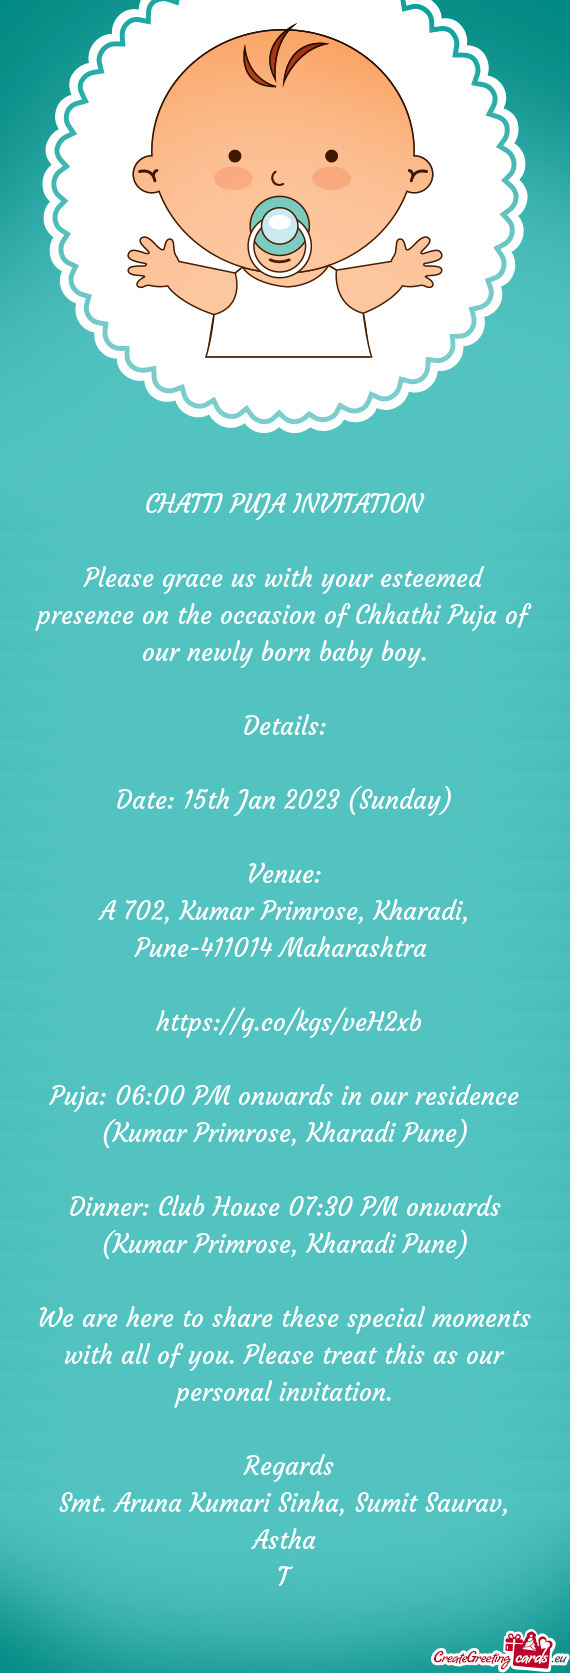 Please grace us with your esteemed presence on the occasion of Chhathi Puja of our newly born baby b